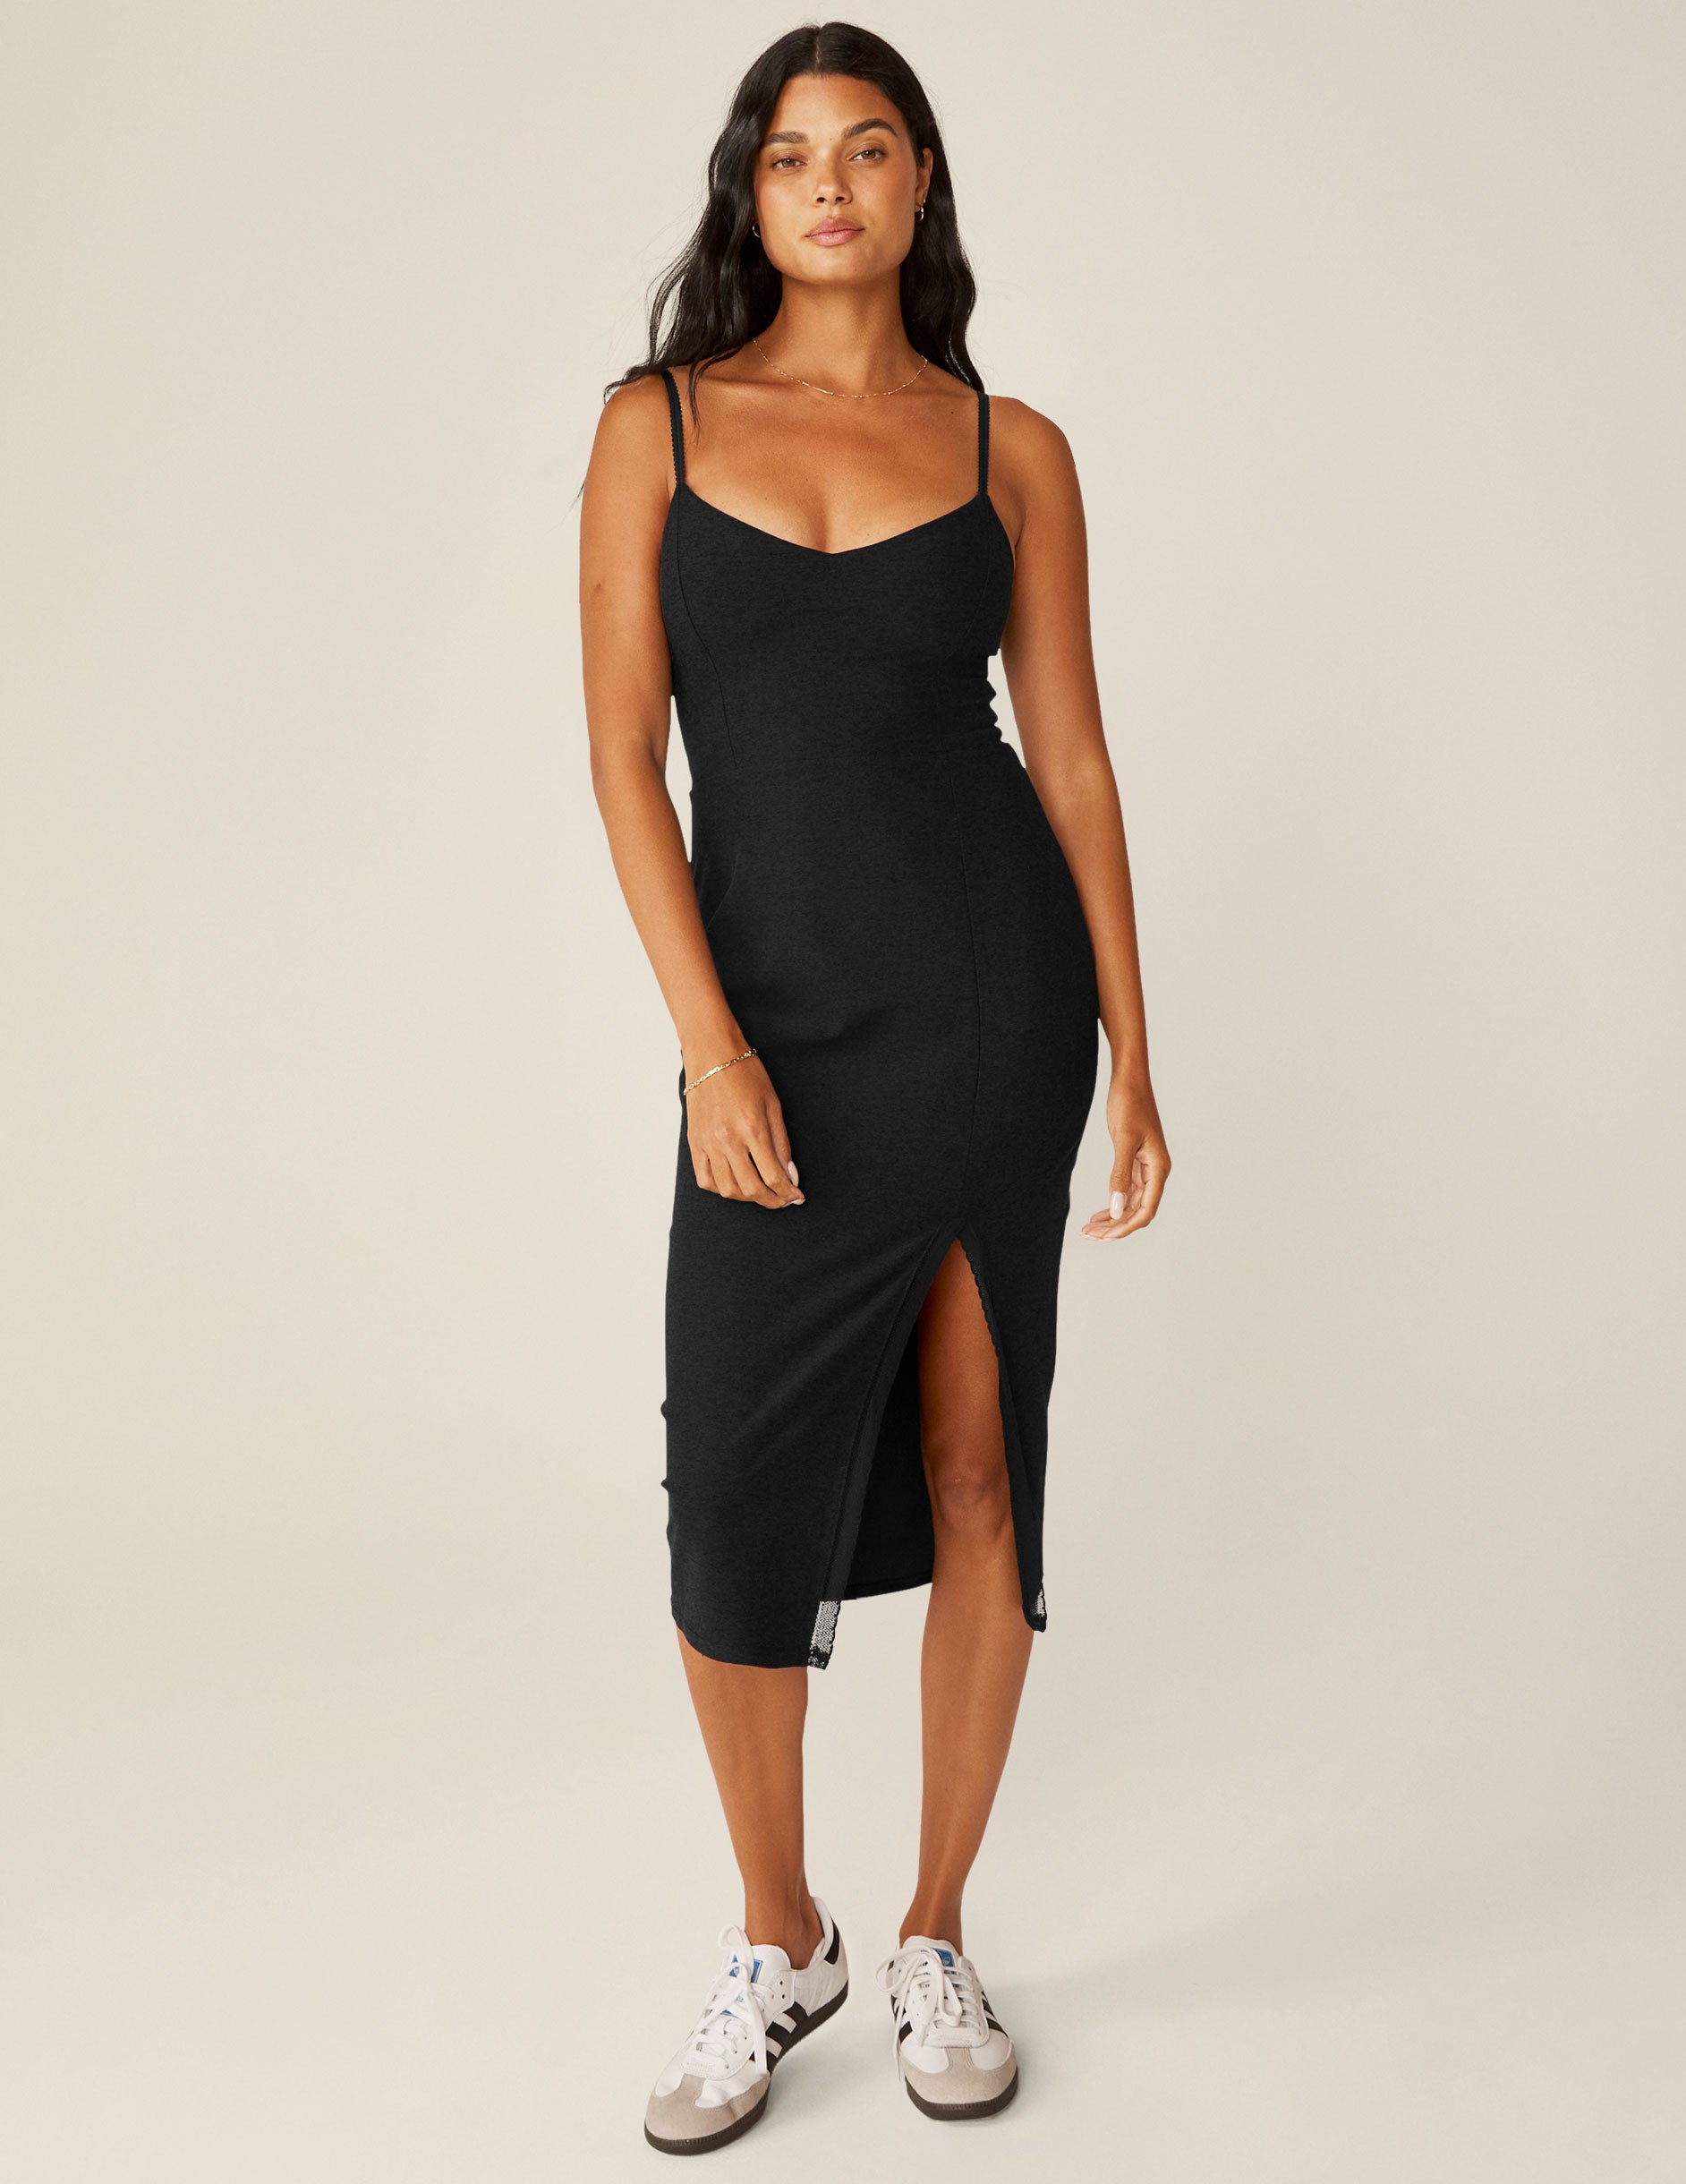 black spaghetti strap midi dress with a front side slit and lace trim. 